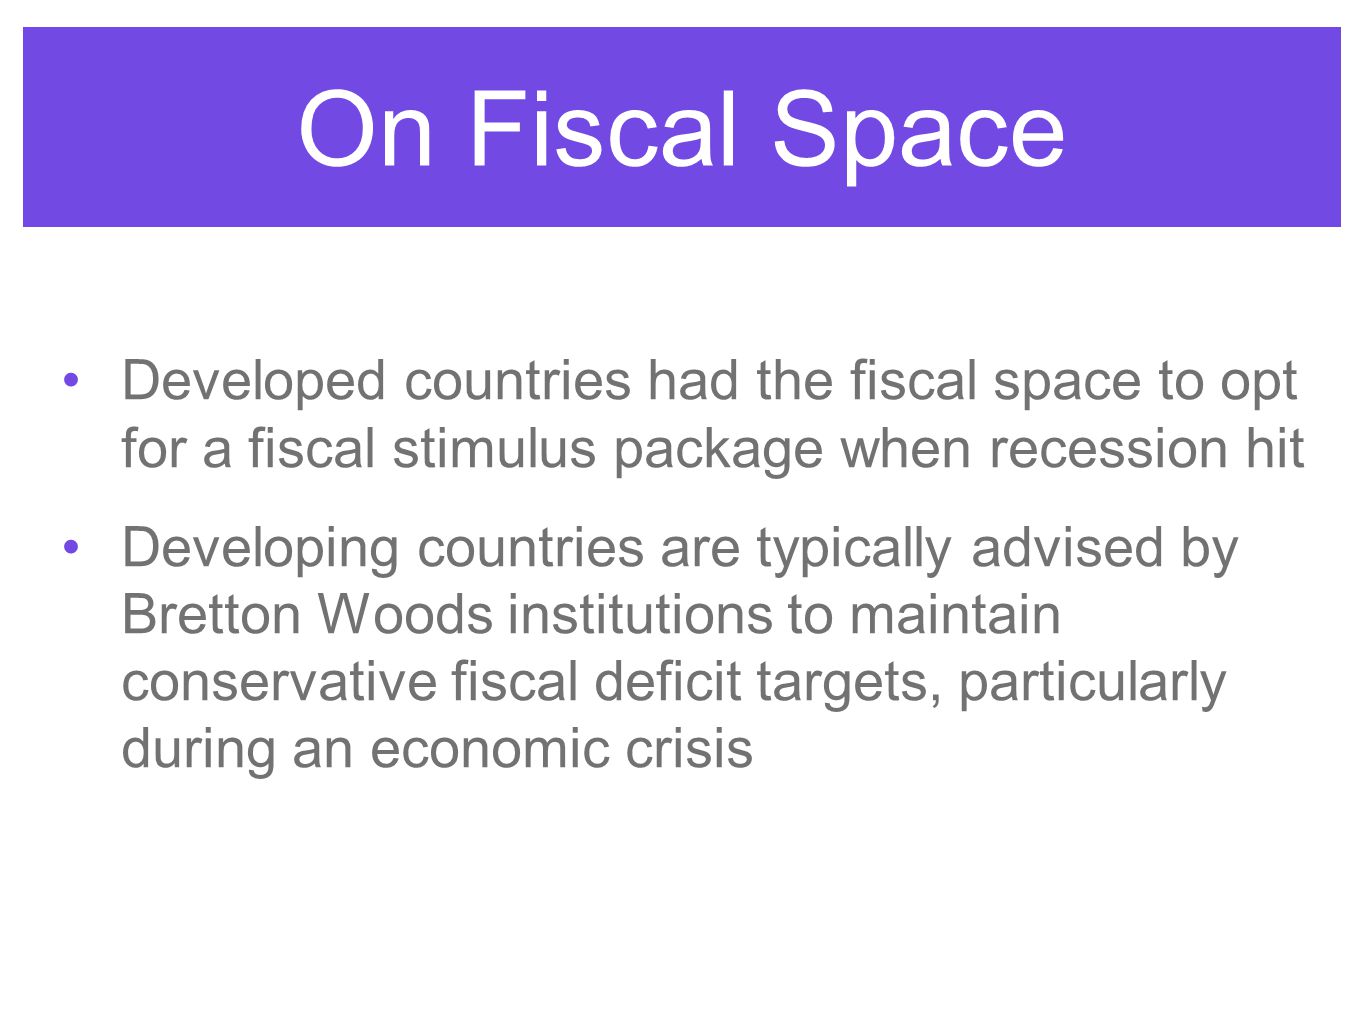 On Fiscal Space Developed countries had the fiscal space to opt for a fiscal stimulus package when recession hit Developing countries are typically advised by Bretton Woods institutions to maintain conservative fiscal deficit targets, particularly during an economic crisis